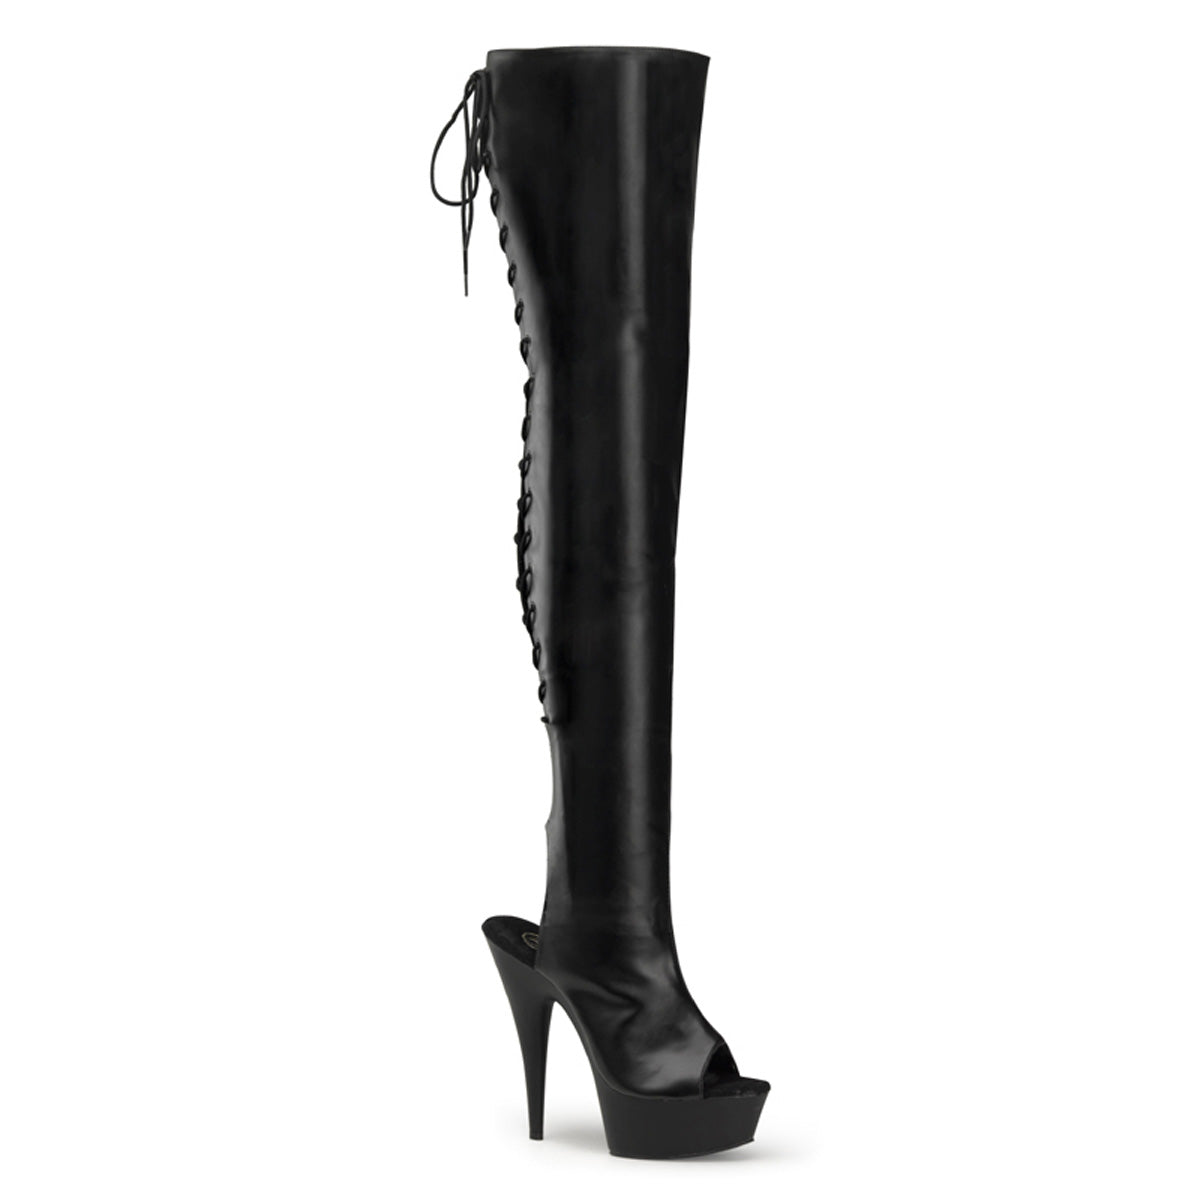 DELIGHT-3017 Black Thigh High Boots